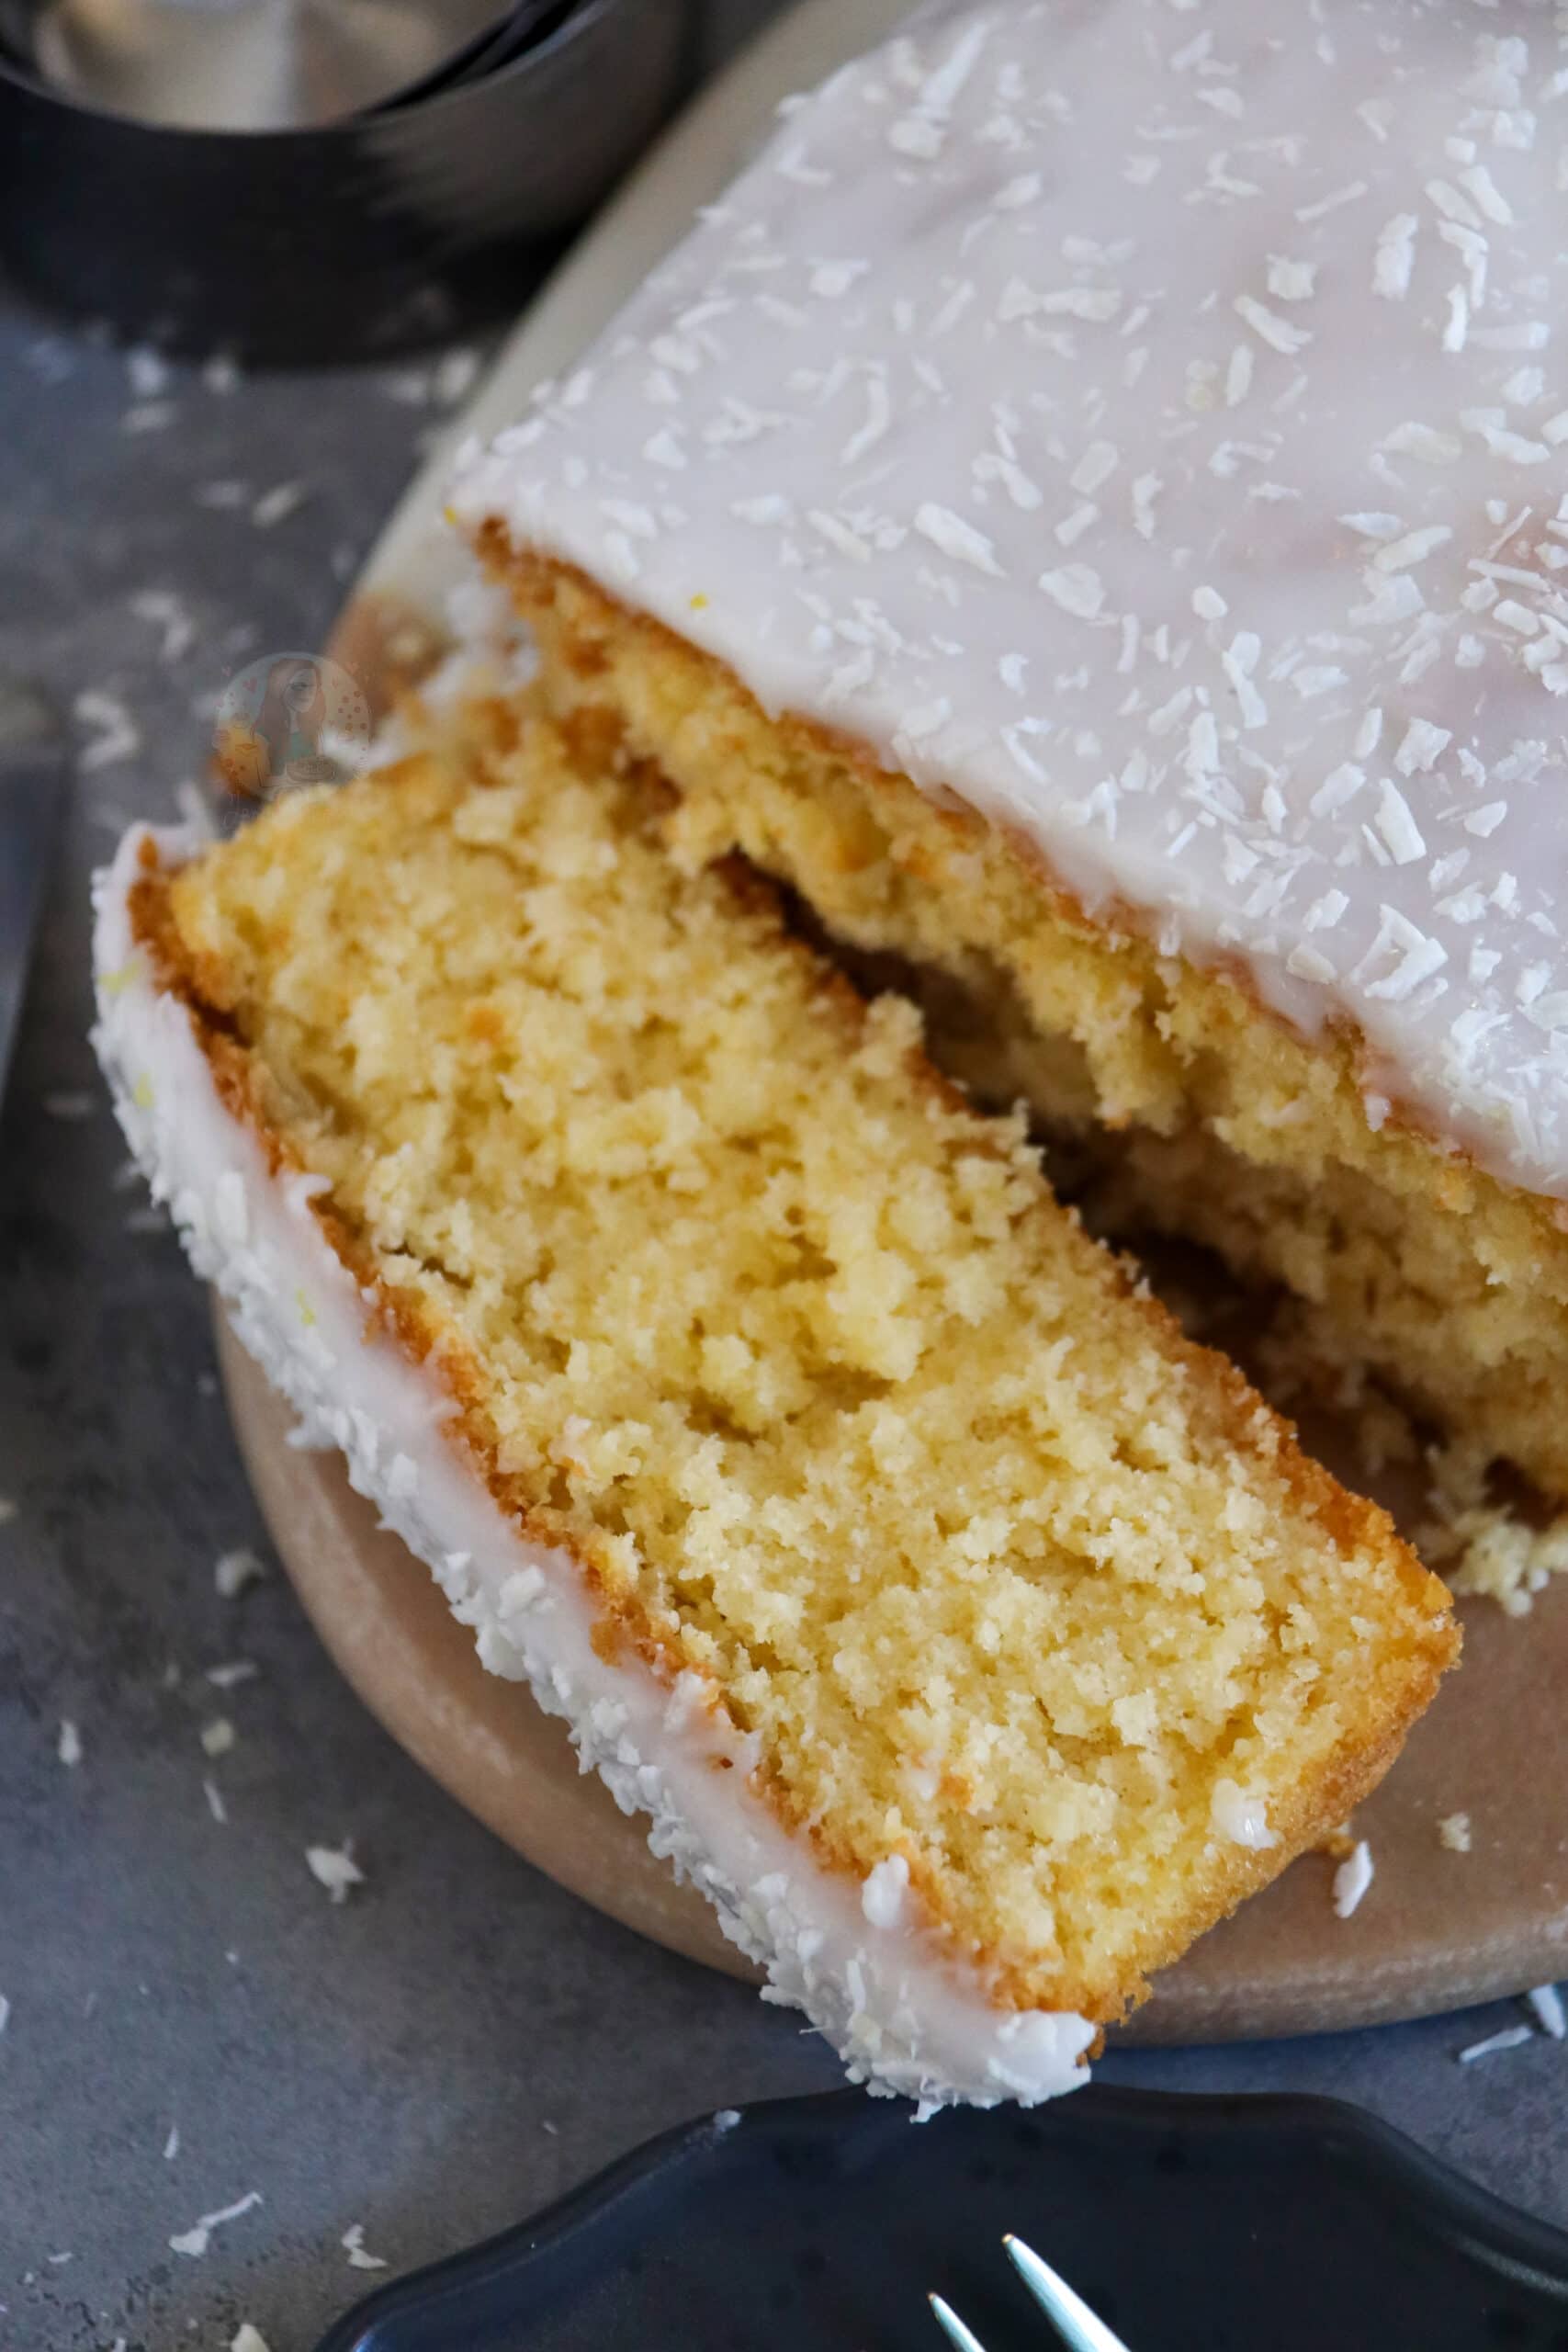 Gluten-free passion fruit and coconut cake recipe - BBC Food